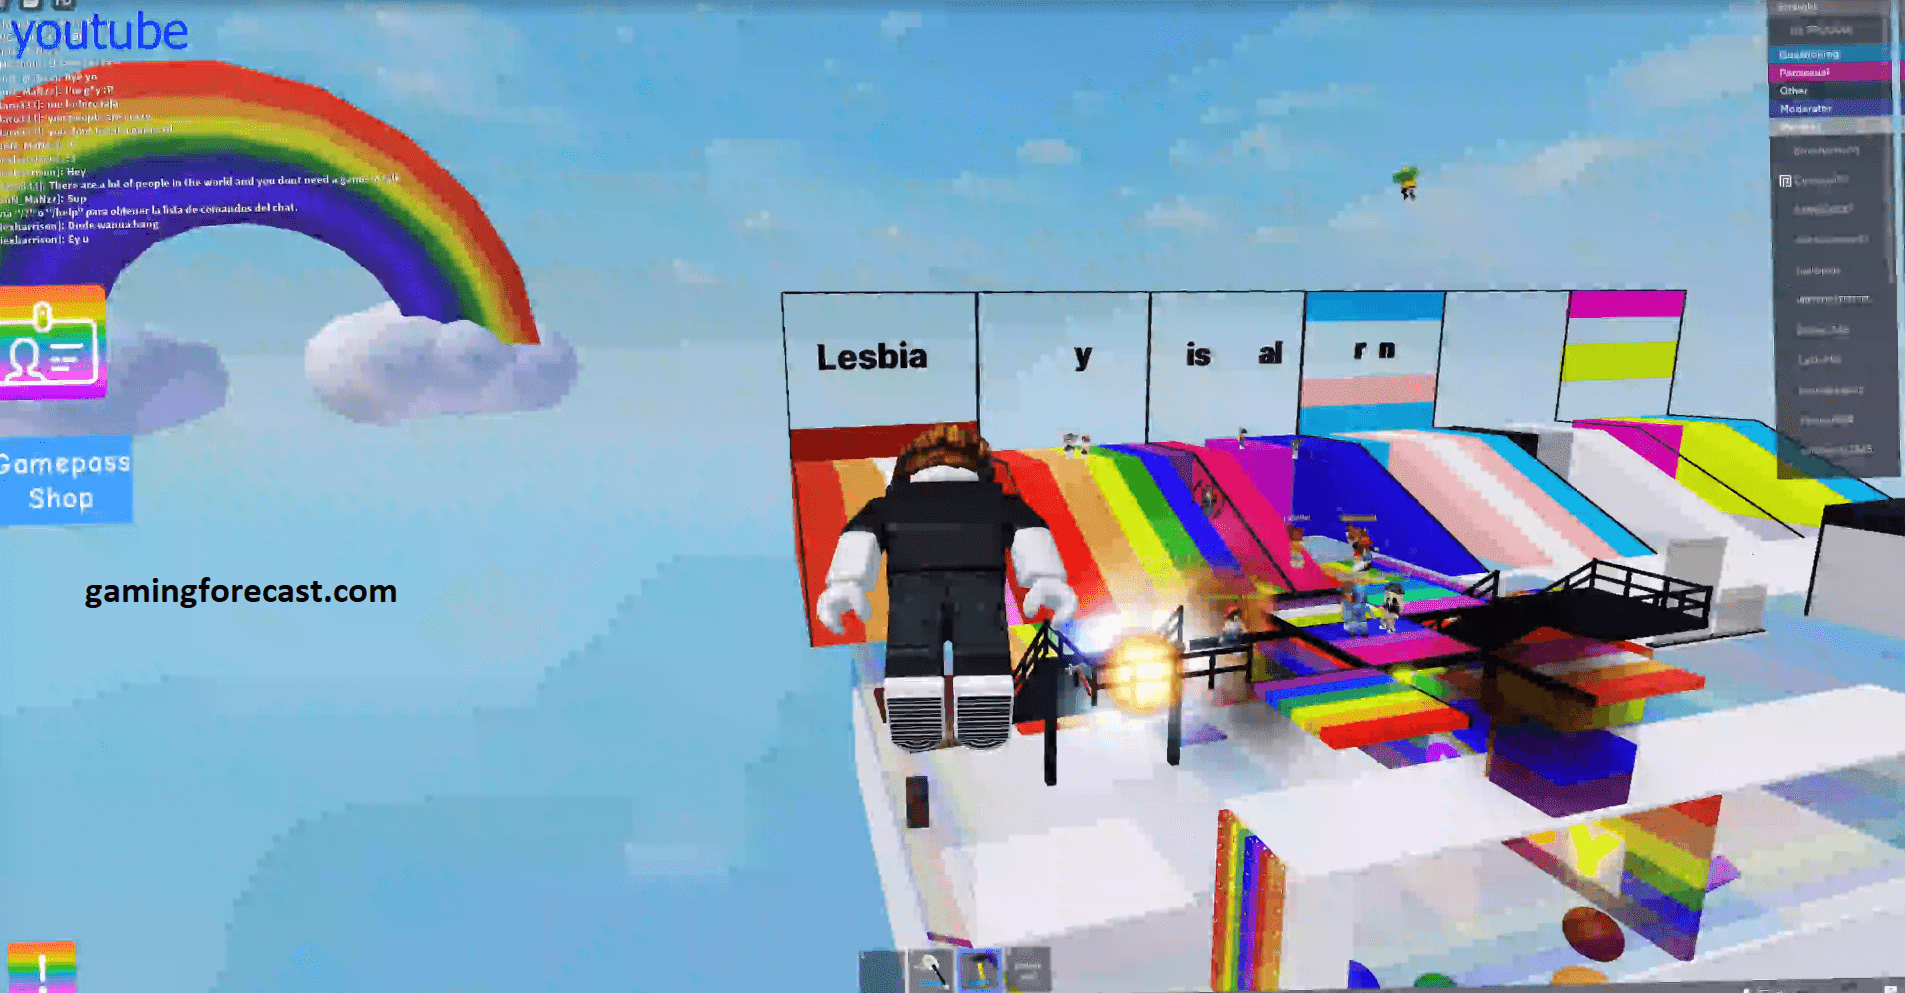 Roblox Hack Download Pc Destroy Lobby Fly Aimbot Scripts 2021 Gaming Forecast Download Free Online Game Hacks - hack app for roblox computer